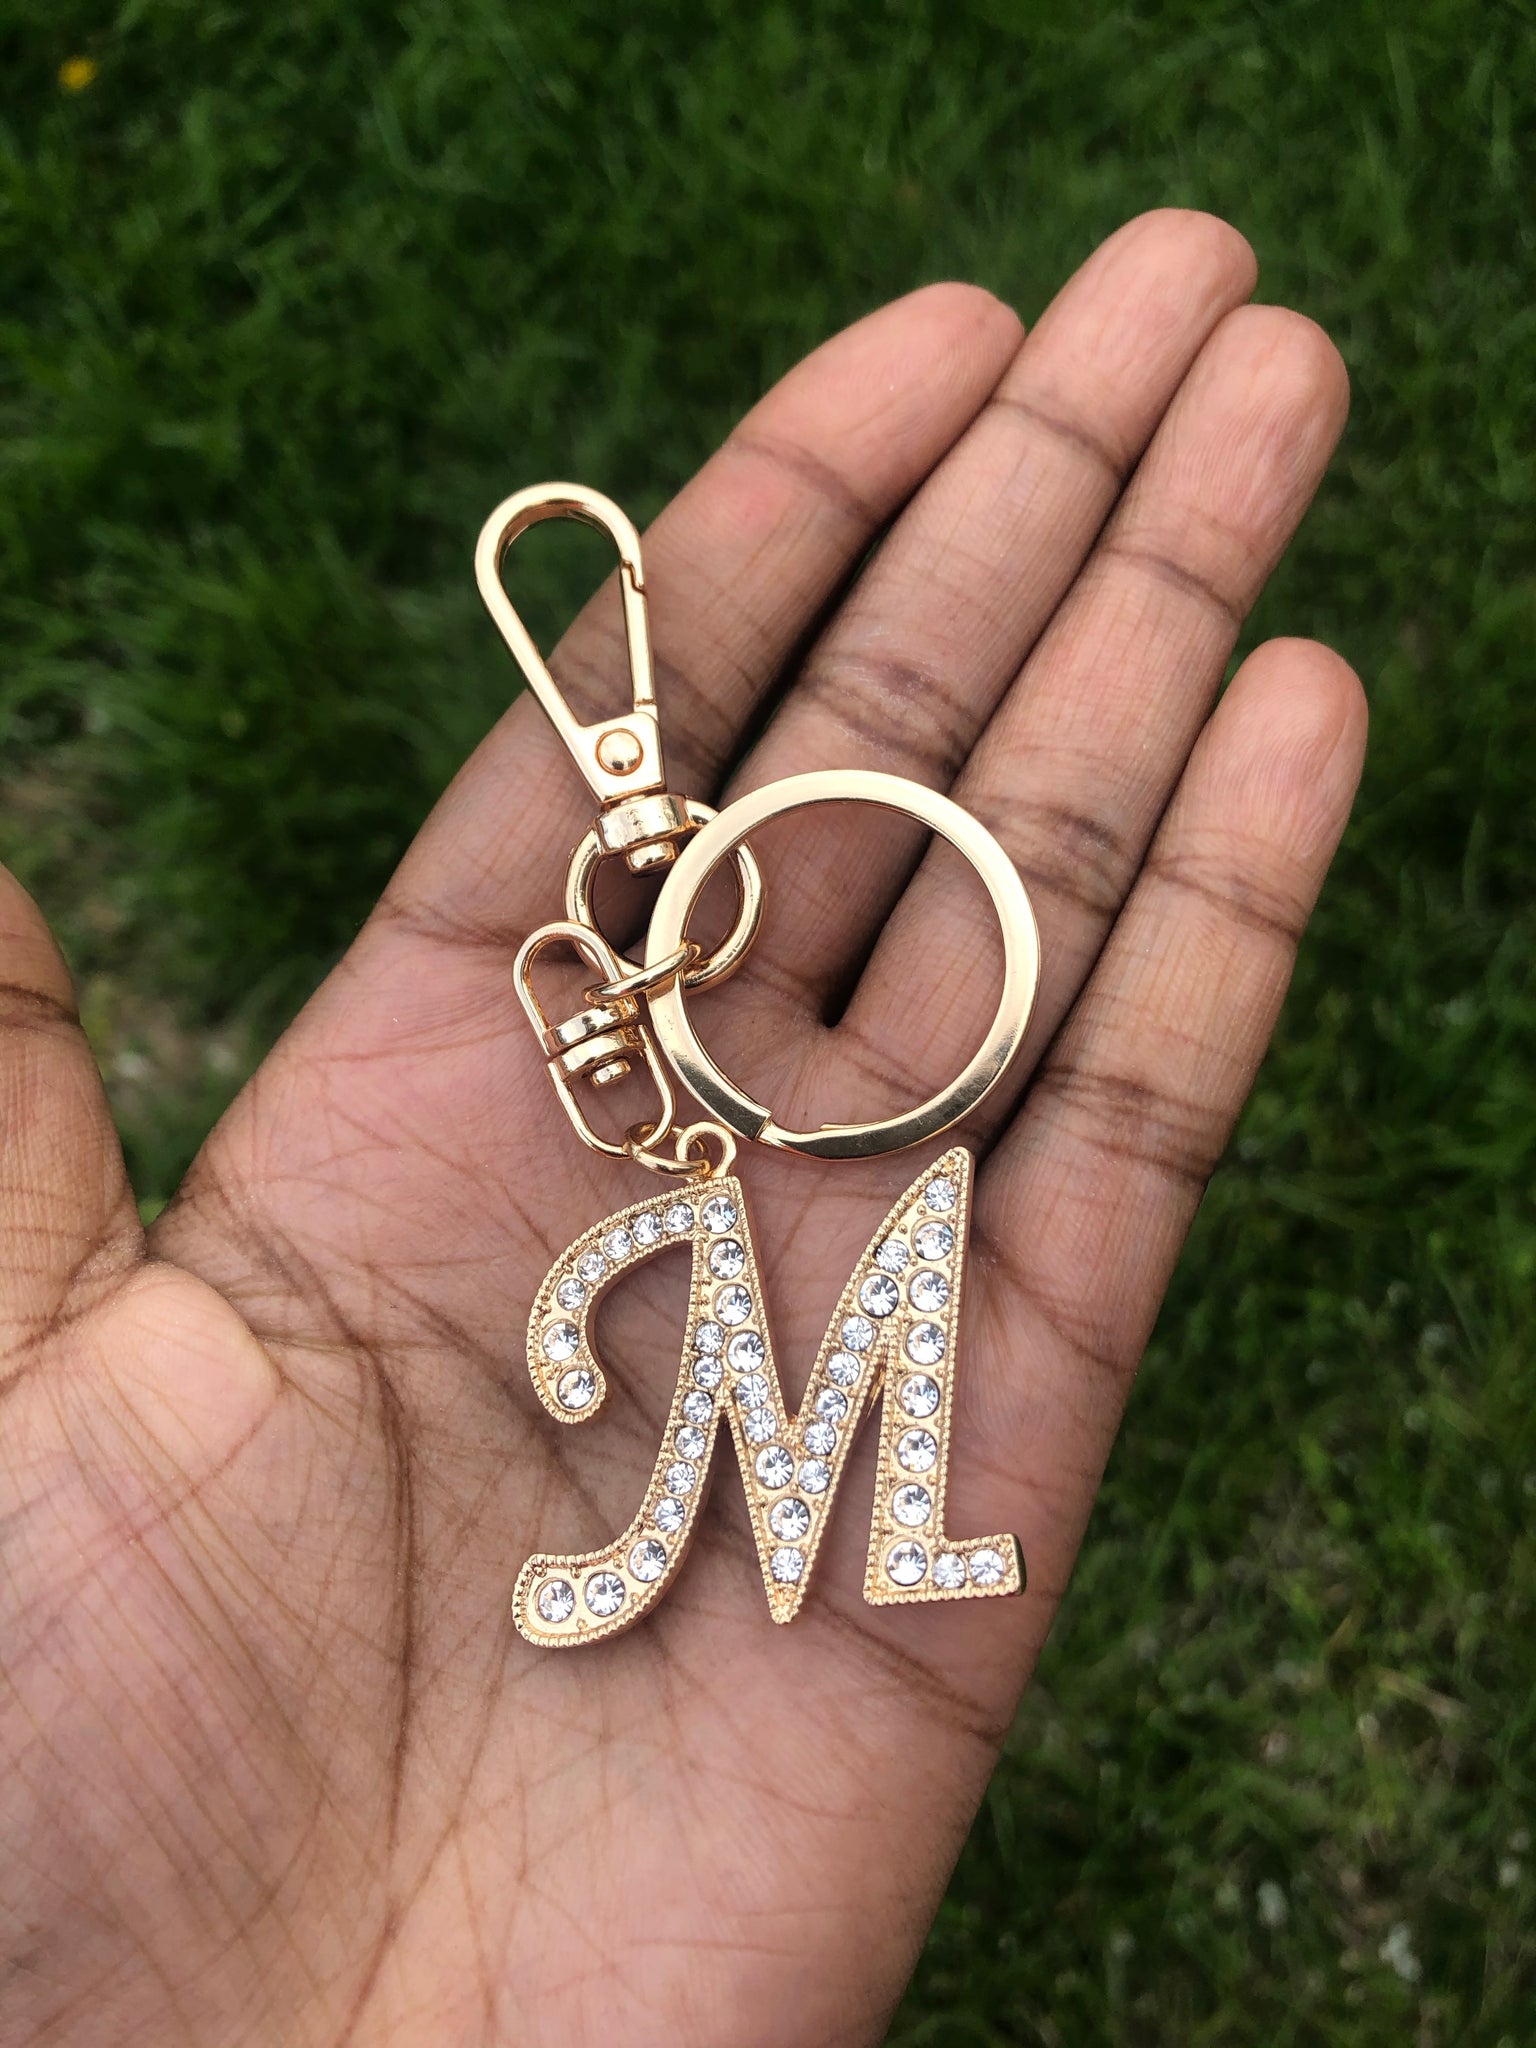 ADD Gold Crystal Personalized Initial Letter Keychain to Squeeze Tube –  Heru Cosmetics